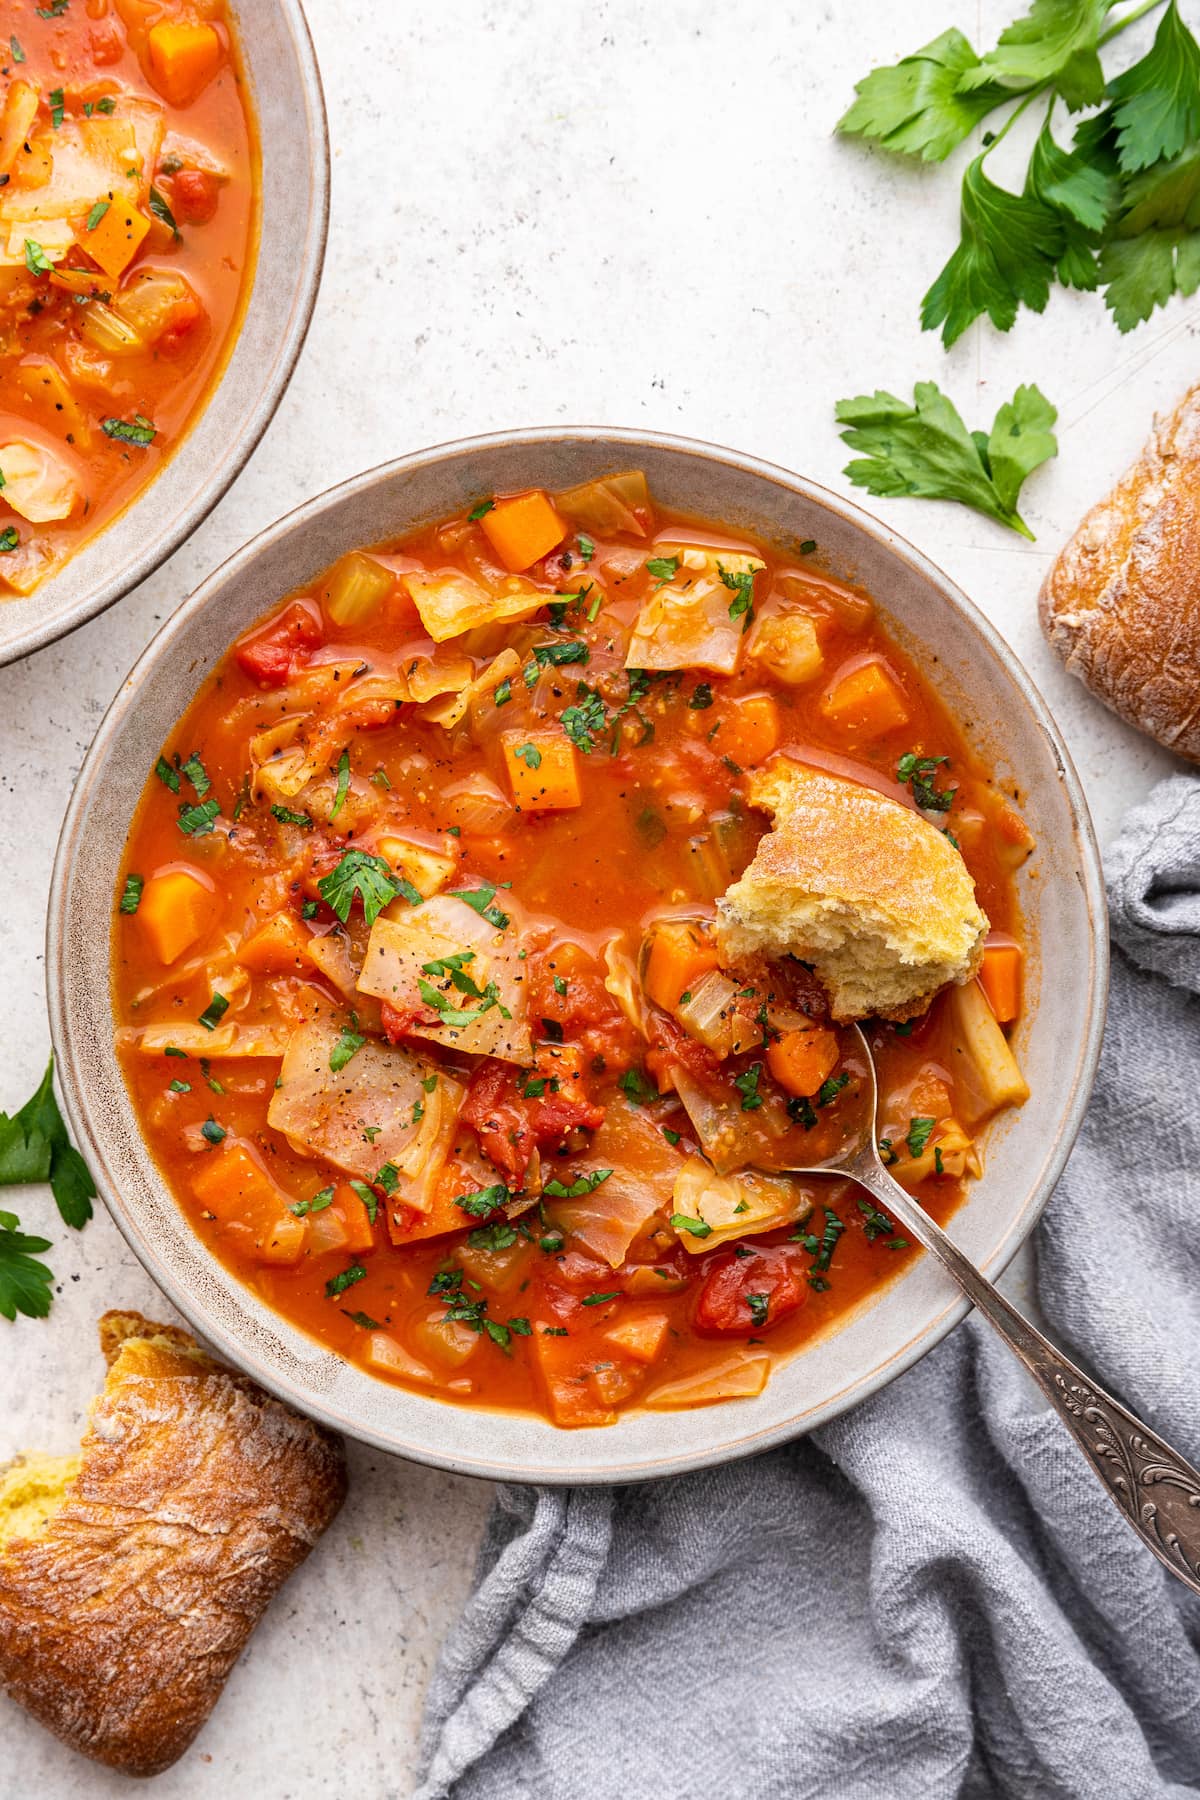 Cabbage soup in a bowl with a piece of bread inside the soup.